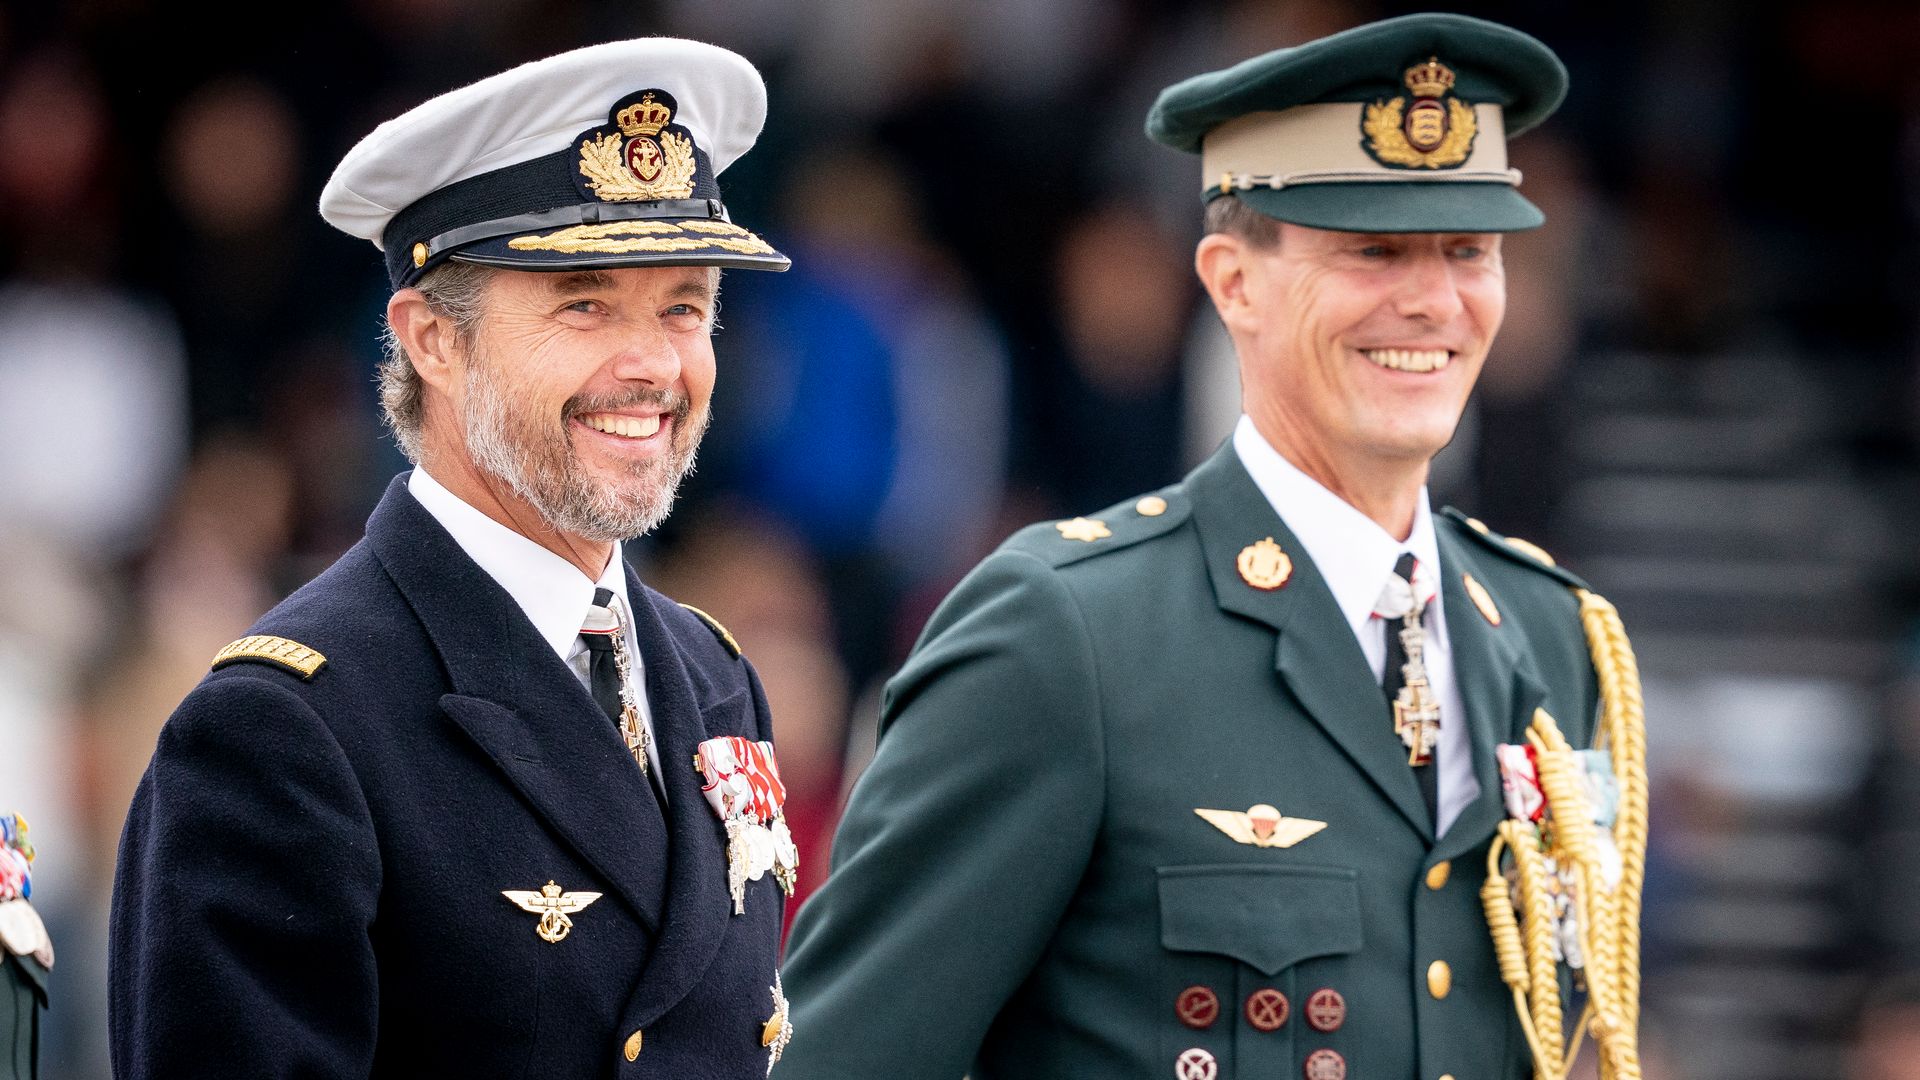 Crown Prince Frederik of Denmark (L) and Prince Joachim of Denmark attend festivities of the Danish Army to celebrate the 50th regency jubilee of their mother Queen Margrethe II of Denmark